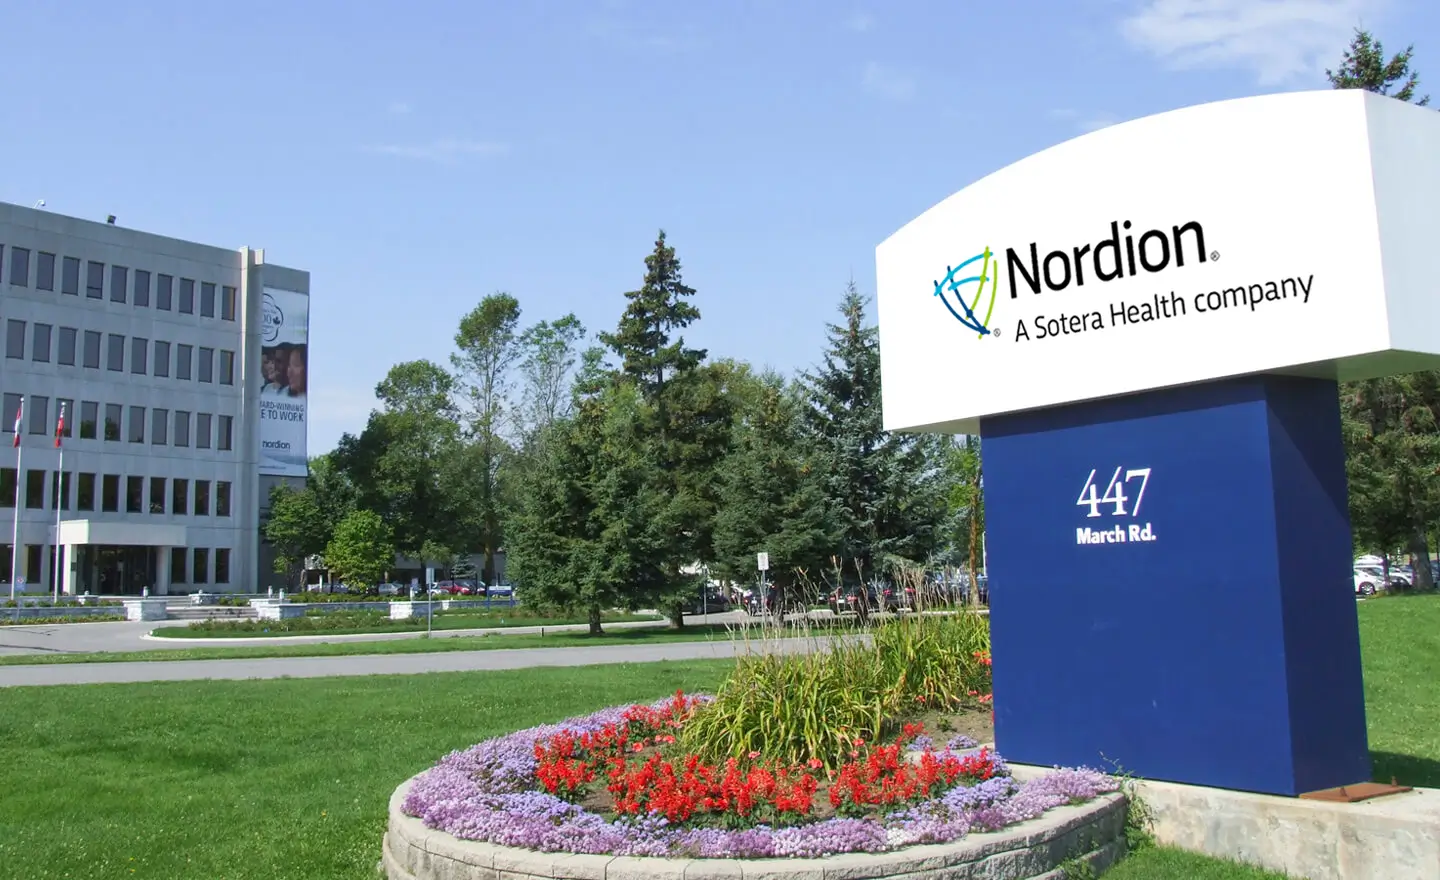 A sign displaying the Nordion logo in front of the Nordion building, with the address 447 March Rd.